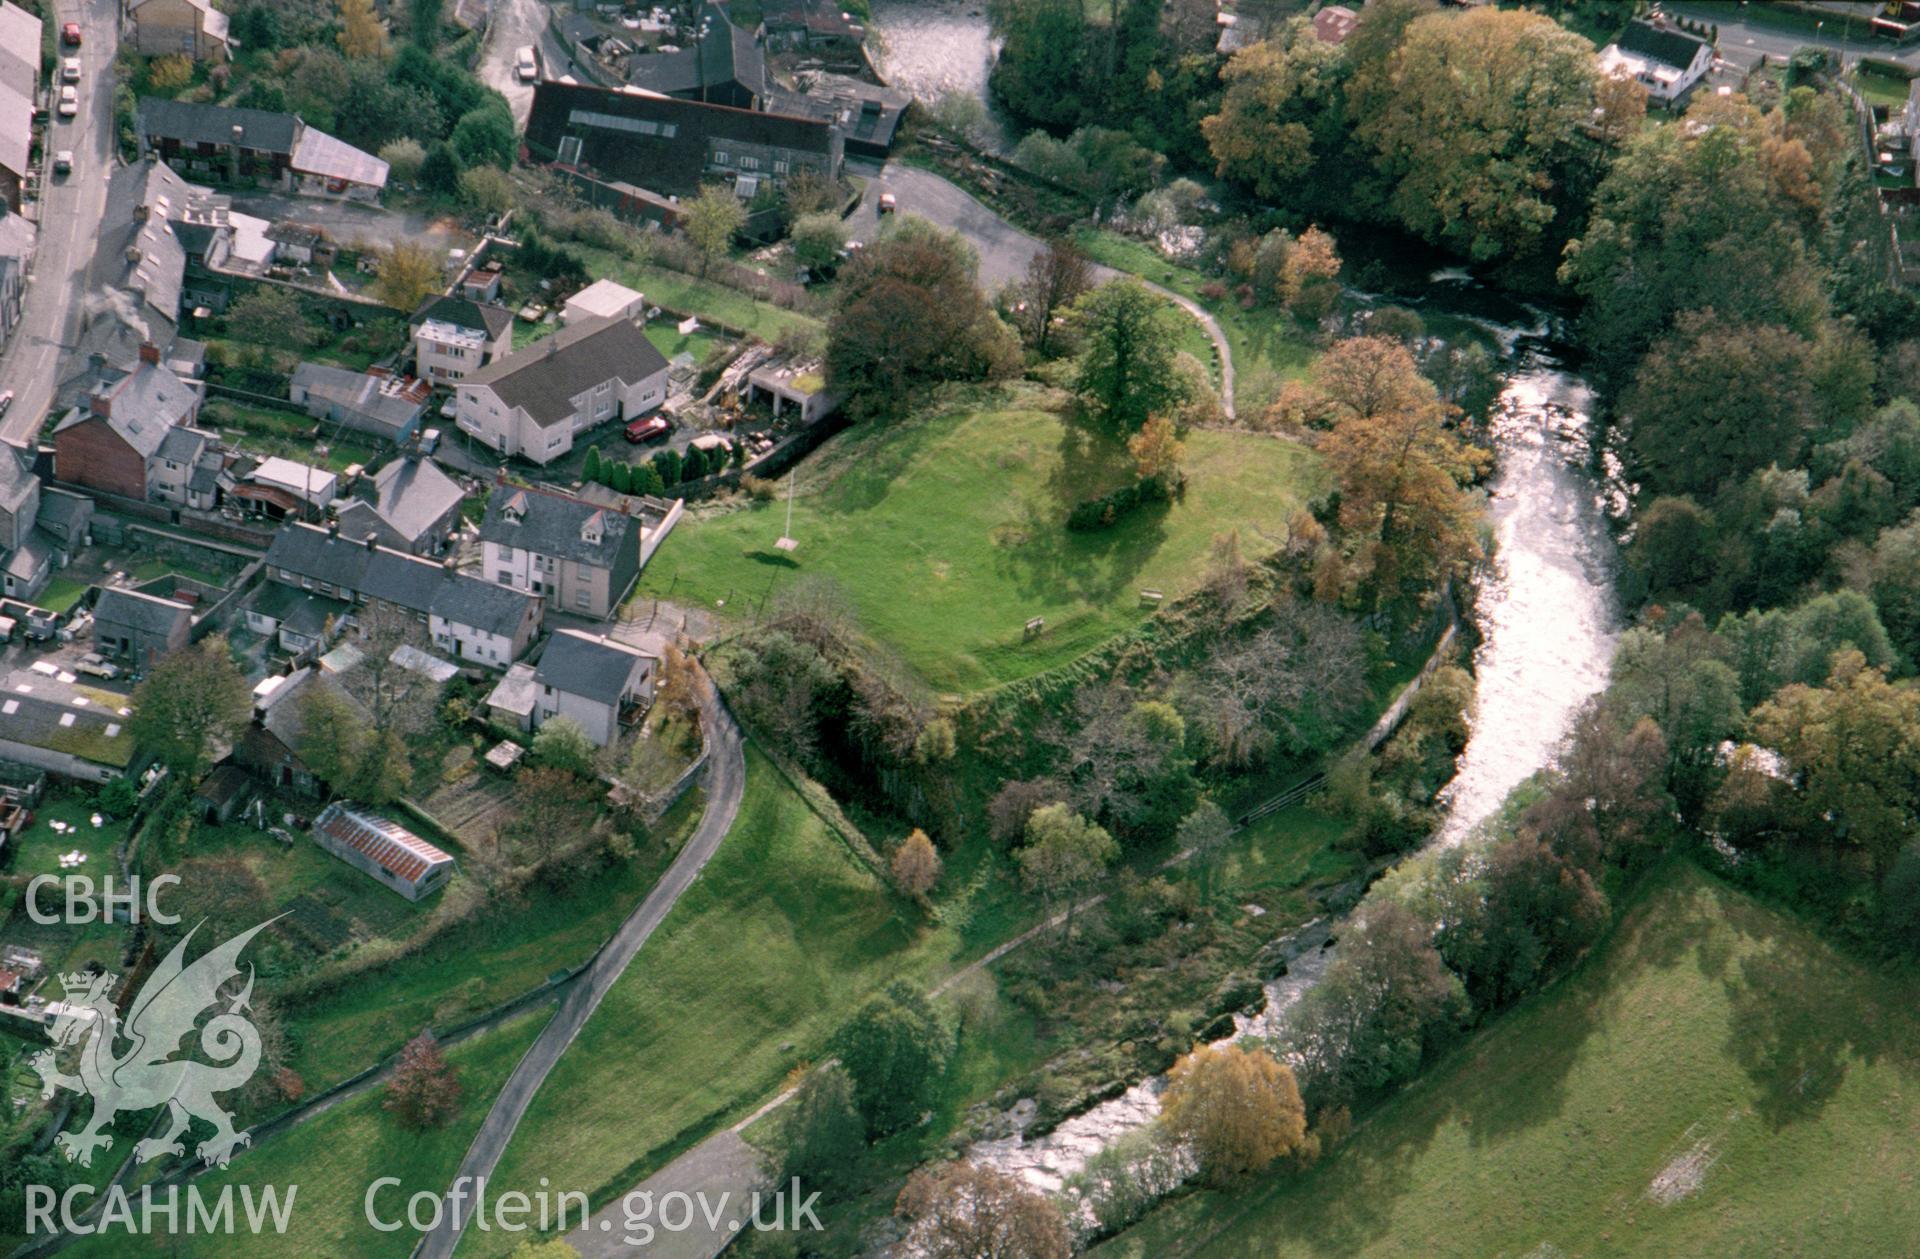 RCAHMW colour slide oblique aerial photograph of Rhayader Castle, taken on 29/10/1992 by CR Musson